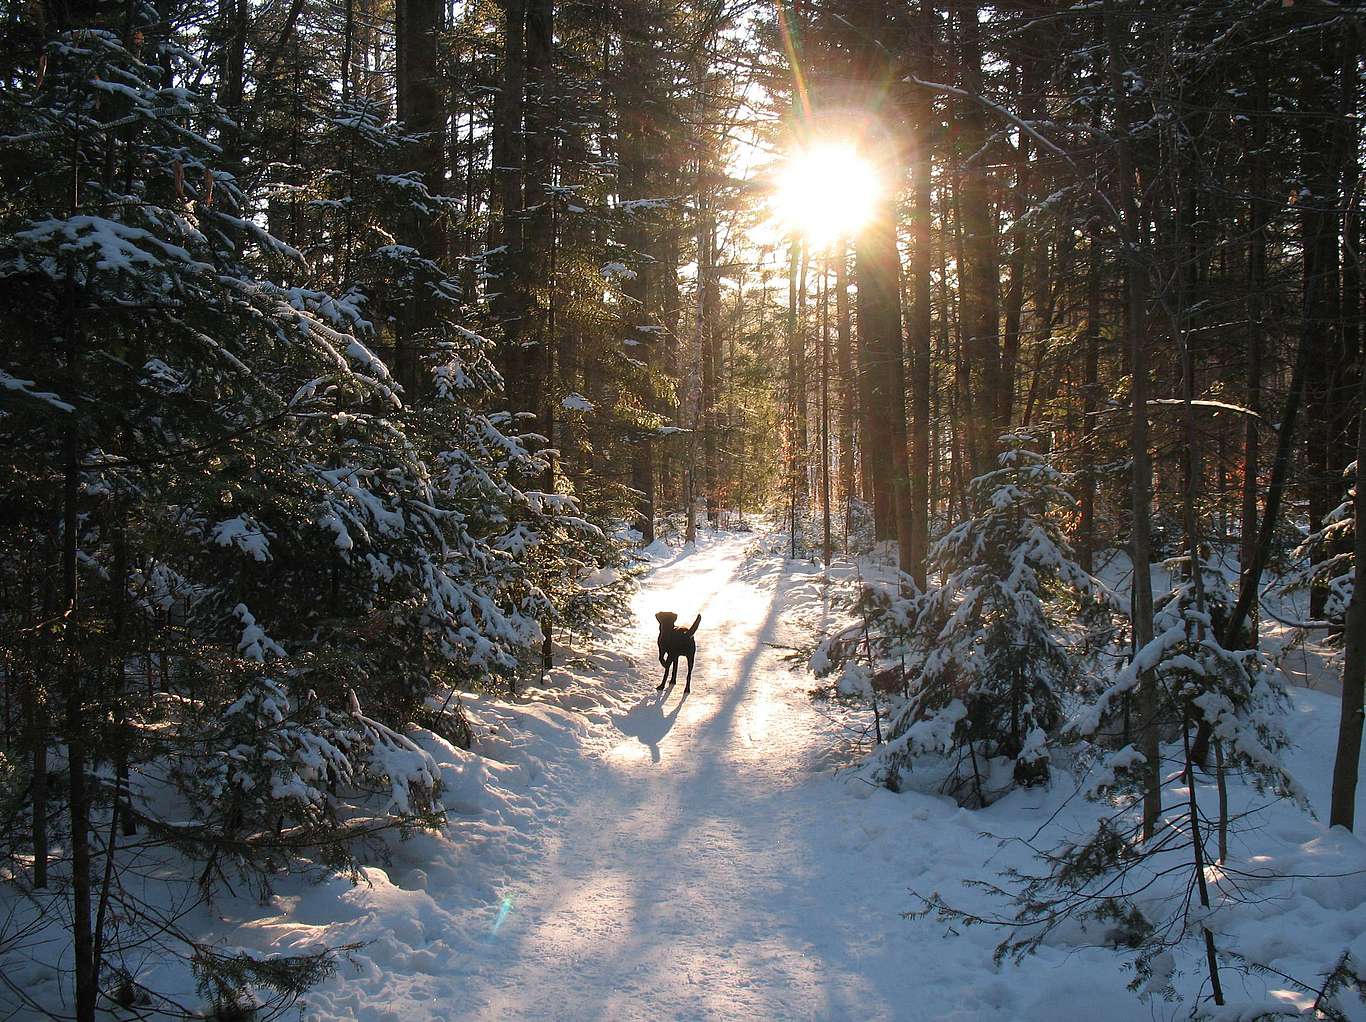 A dog on a snow-covered, forested trail